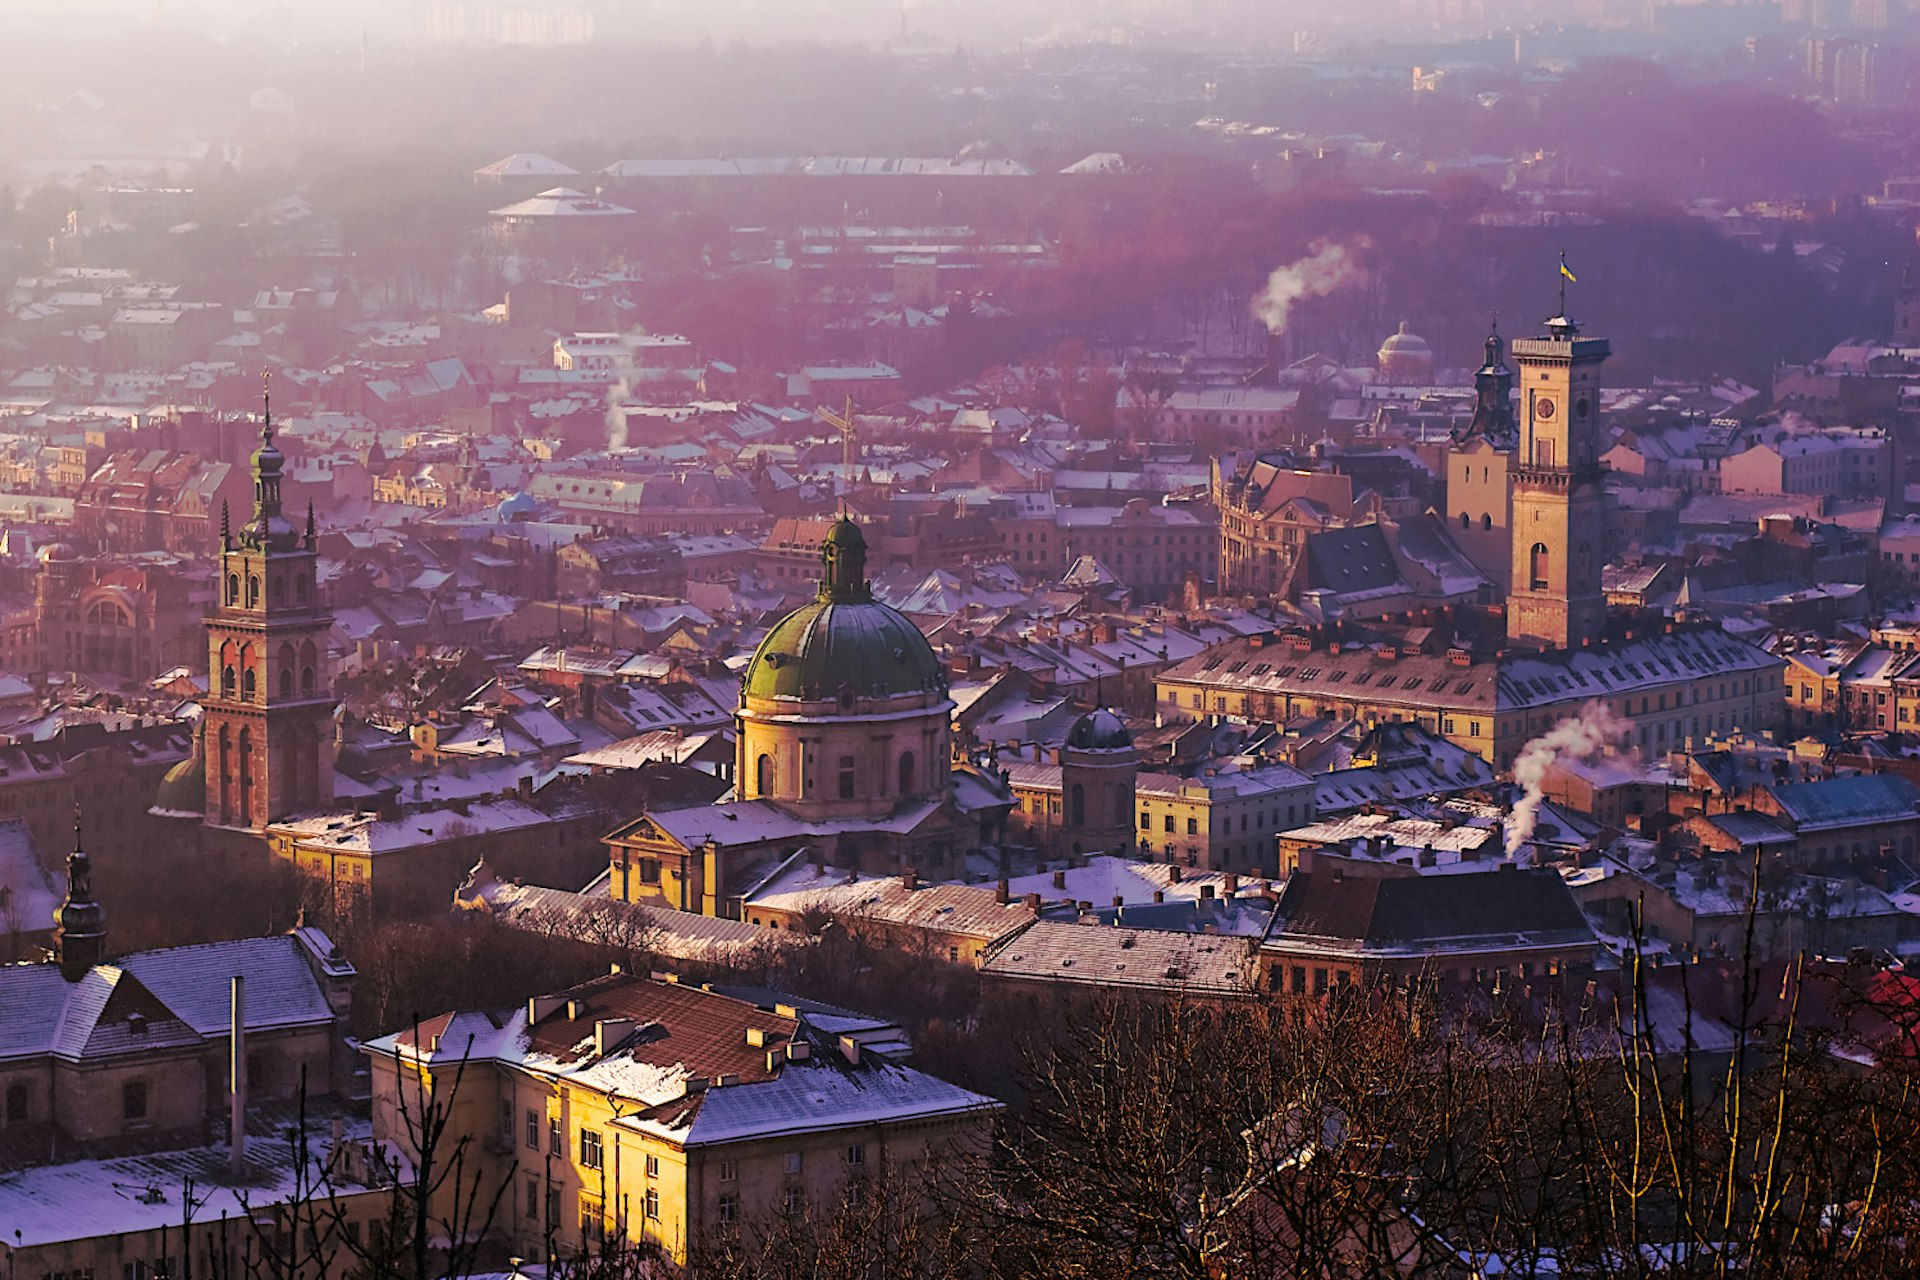 Features - View of the city of Lviv (Lvov) in Western Ukraine